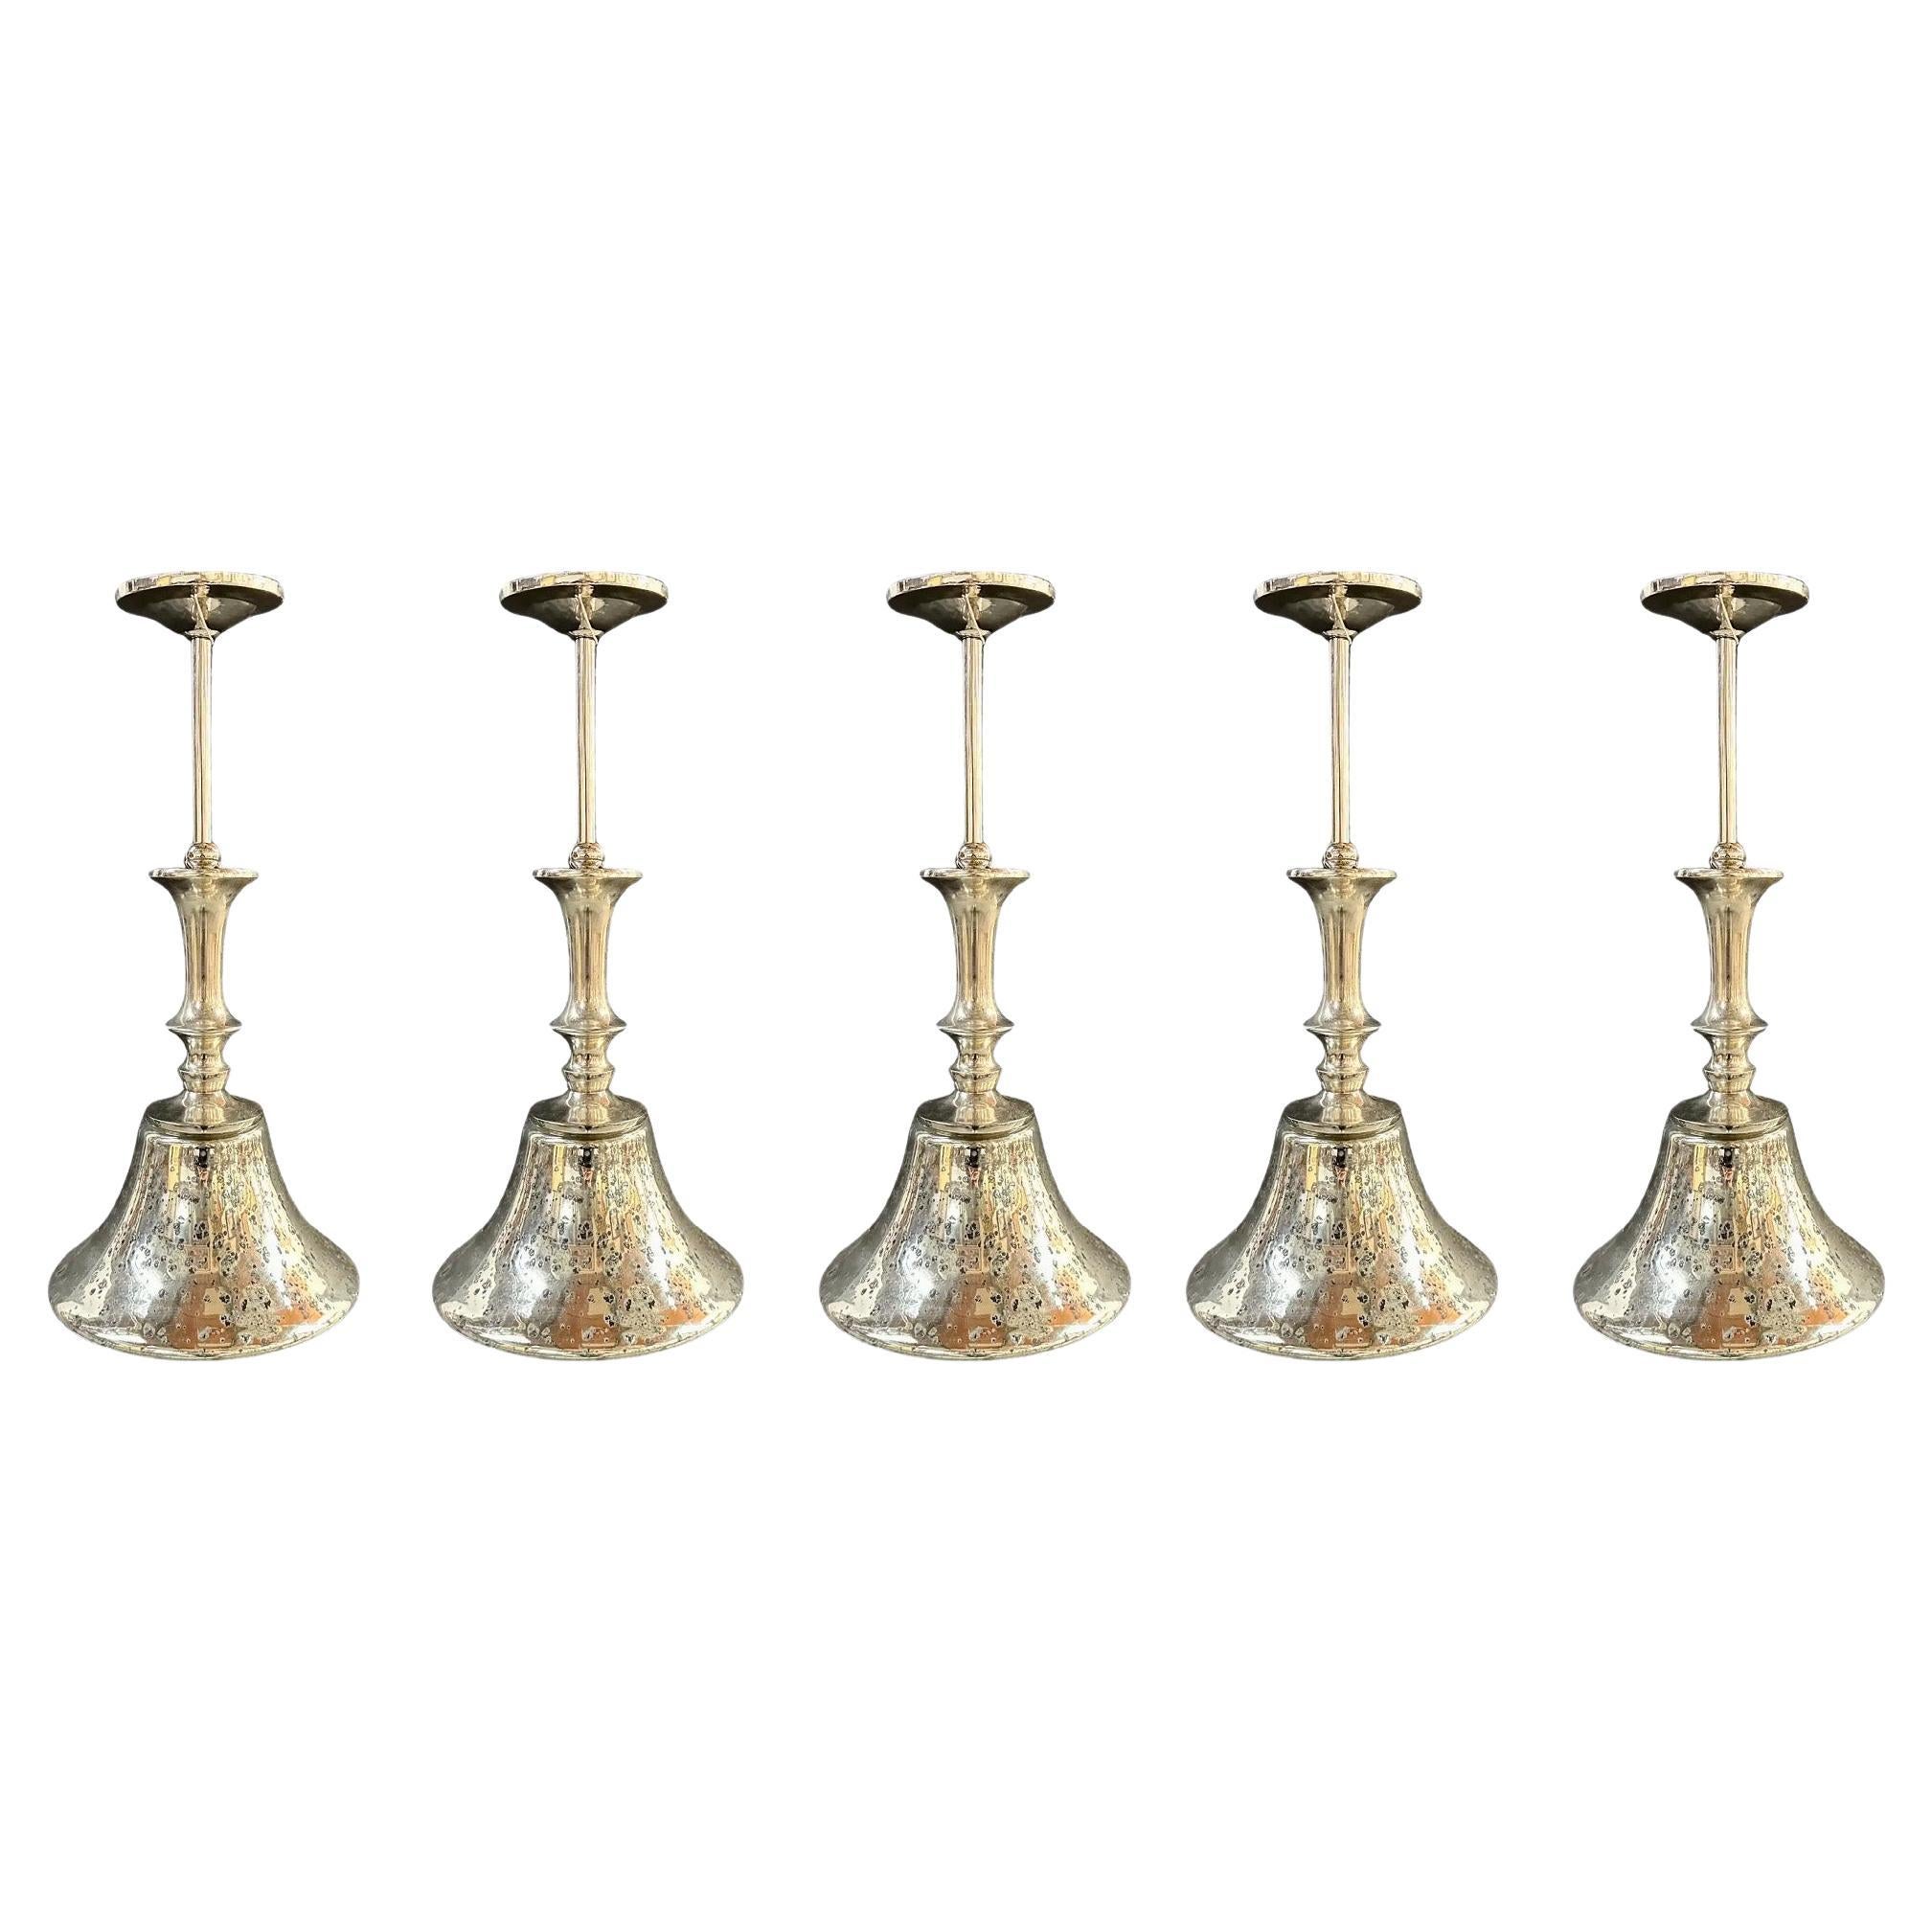  Post Modern style Silver Cone Pendant in Antiqued Finish, Set of 5 For Sale